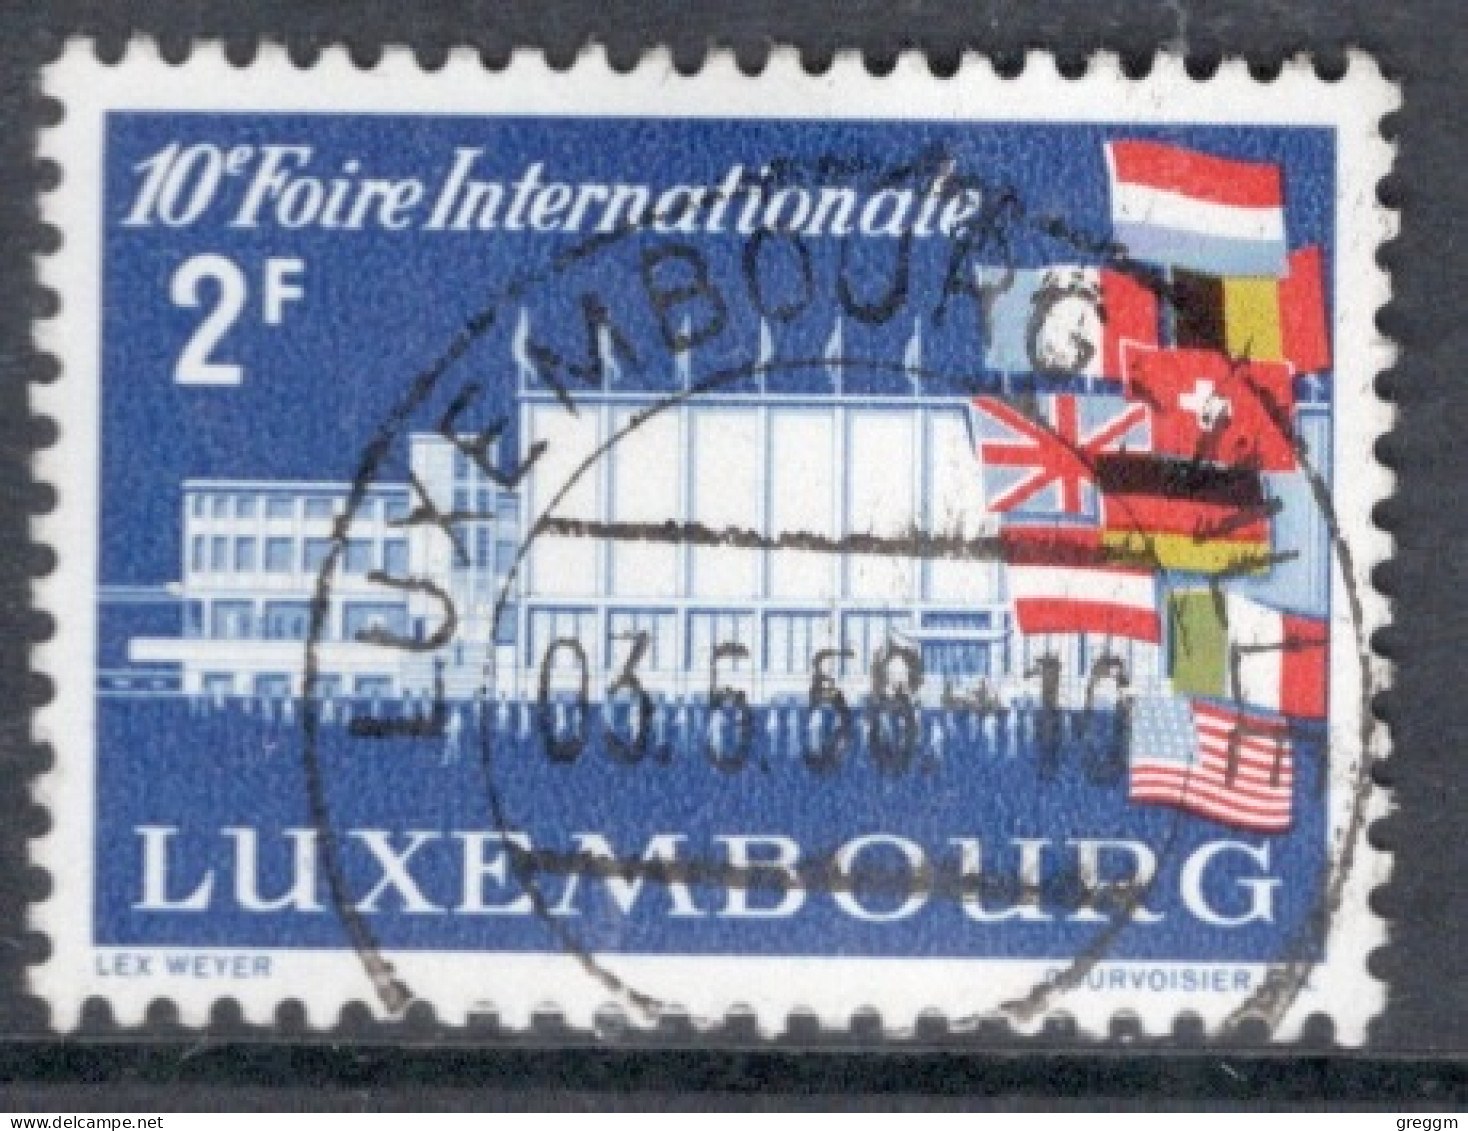 Luxembourg 1958 Single Stamp For The 10th International Luxembourg Fair In Fine Used - Usati